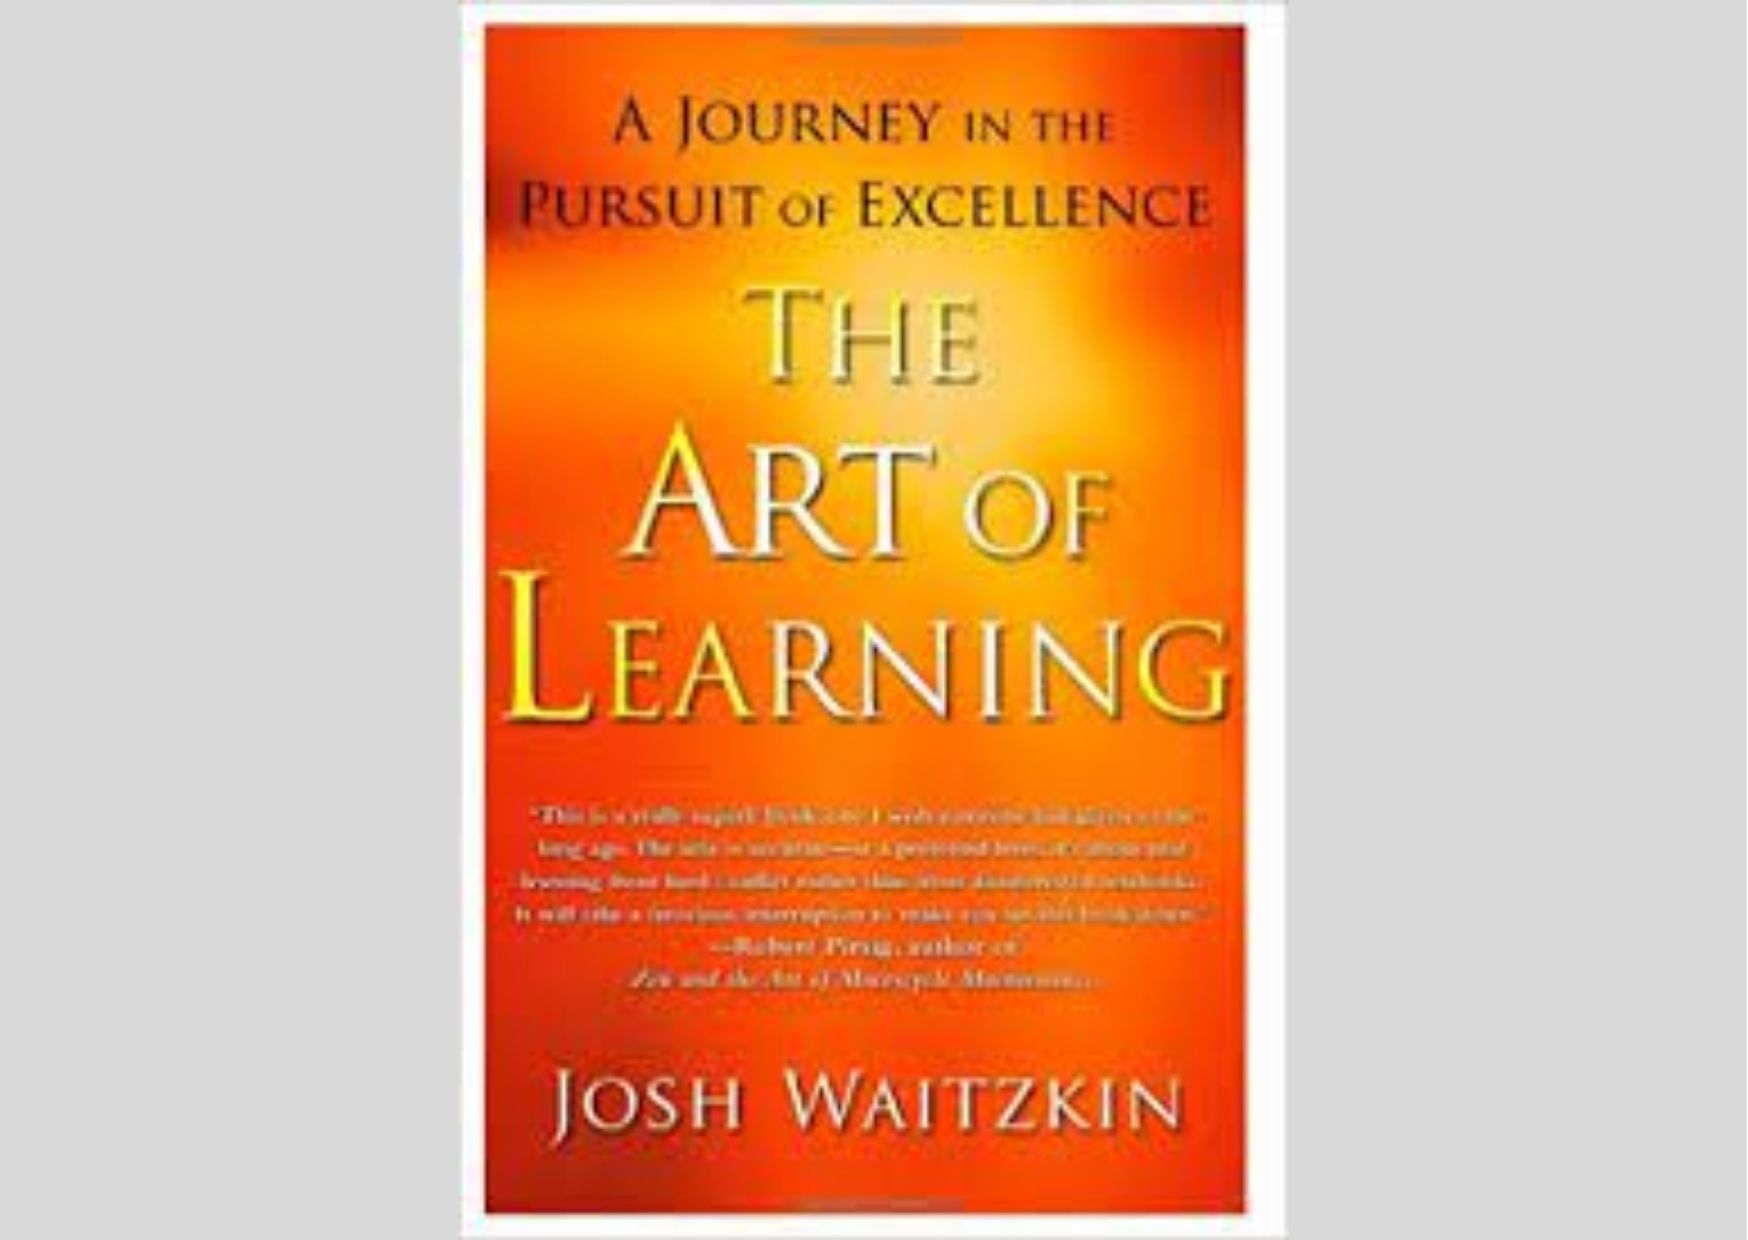 The Art of Learning by Josh Waitzkin – What Got You There With